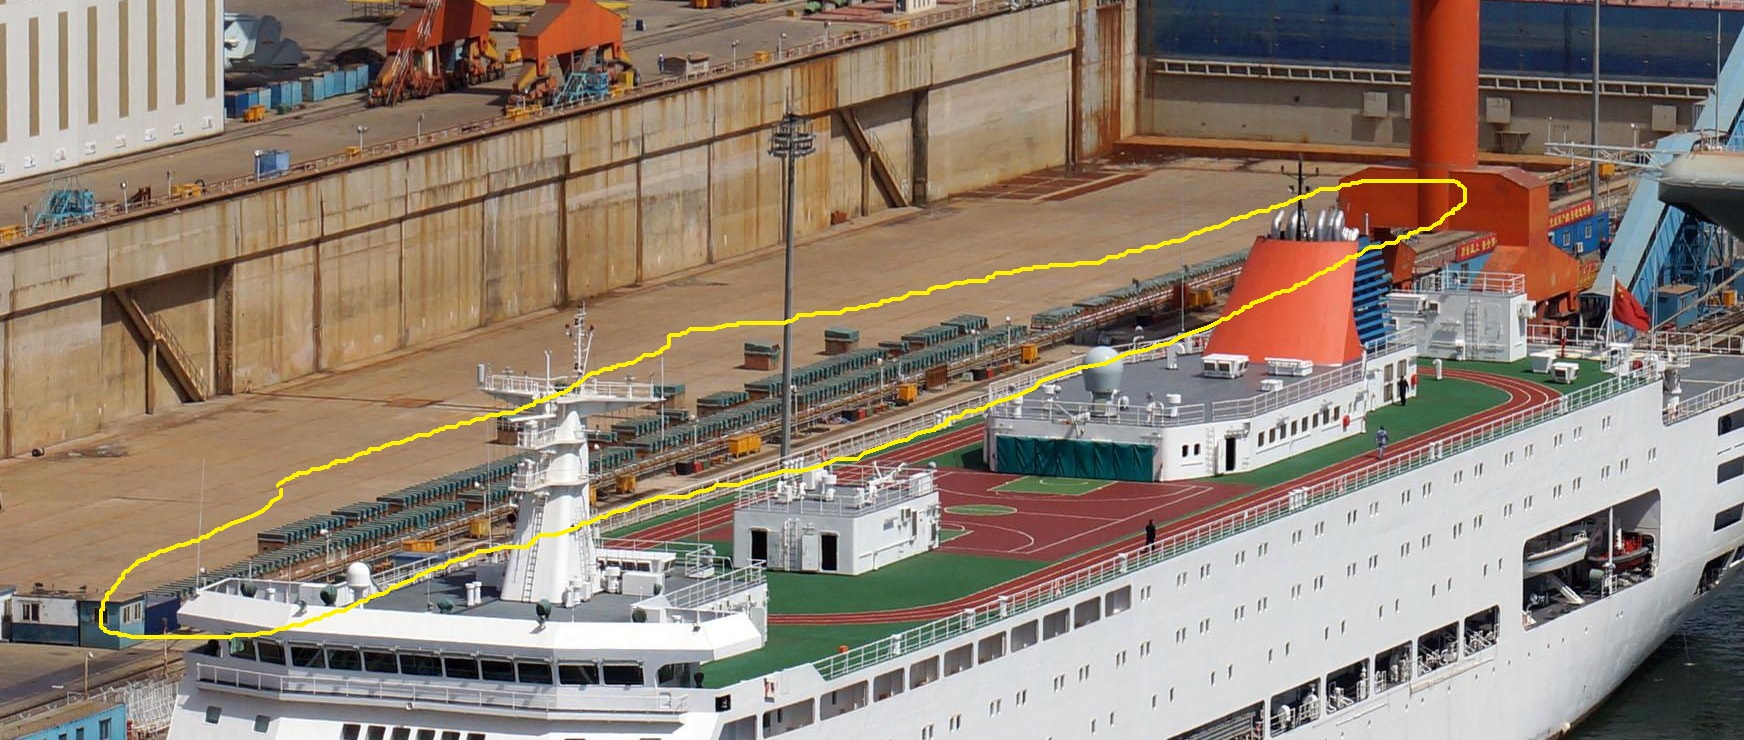 PLN Type 002 carrier + news maybe in empty dry dock at Dalian - 20190405 part+.jpg